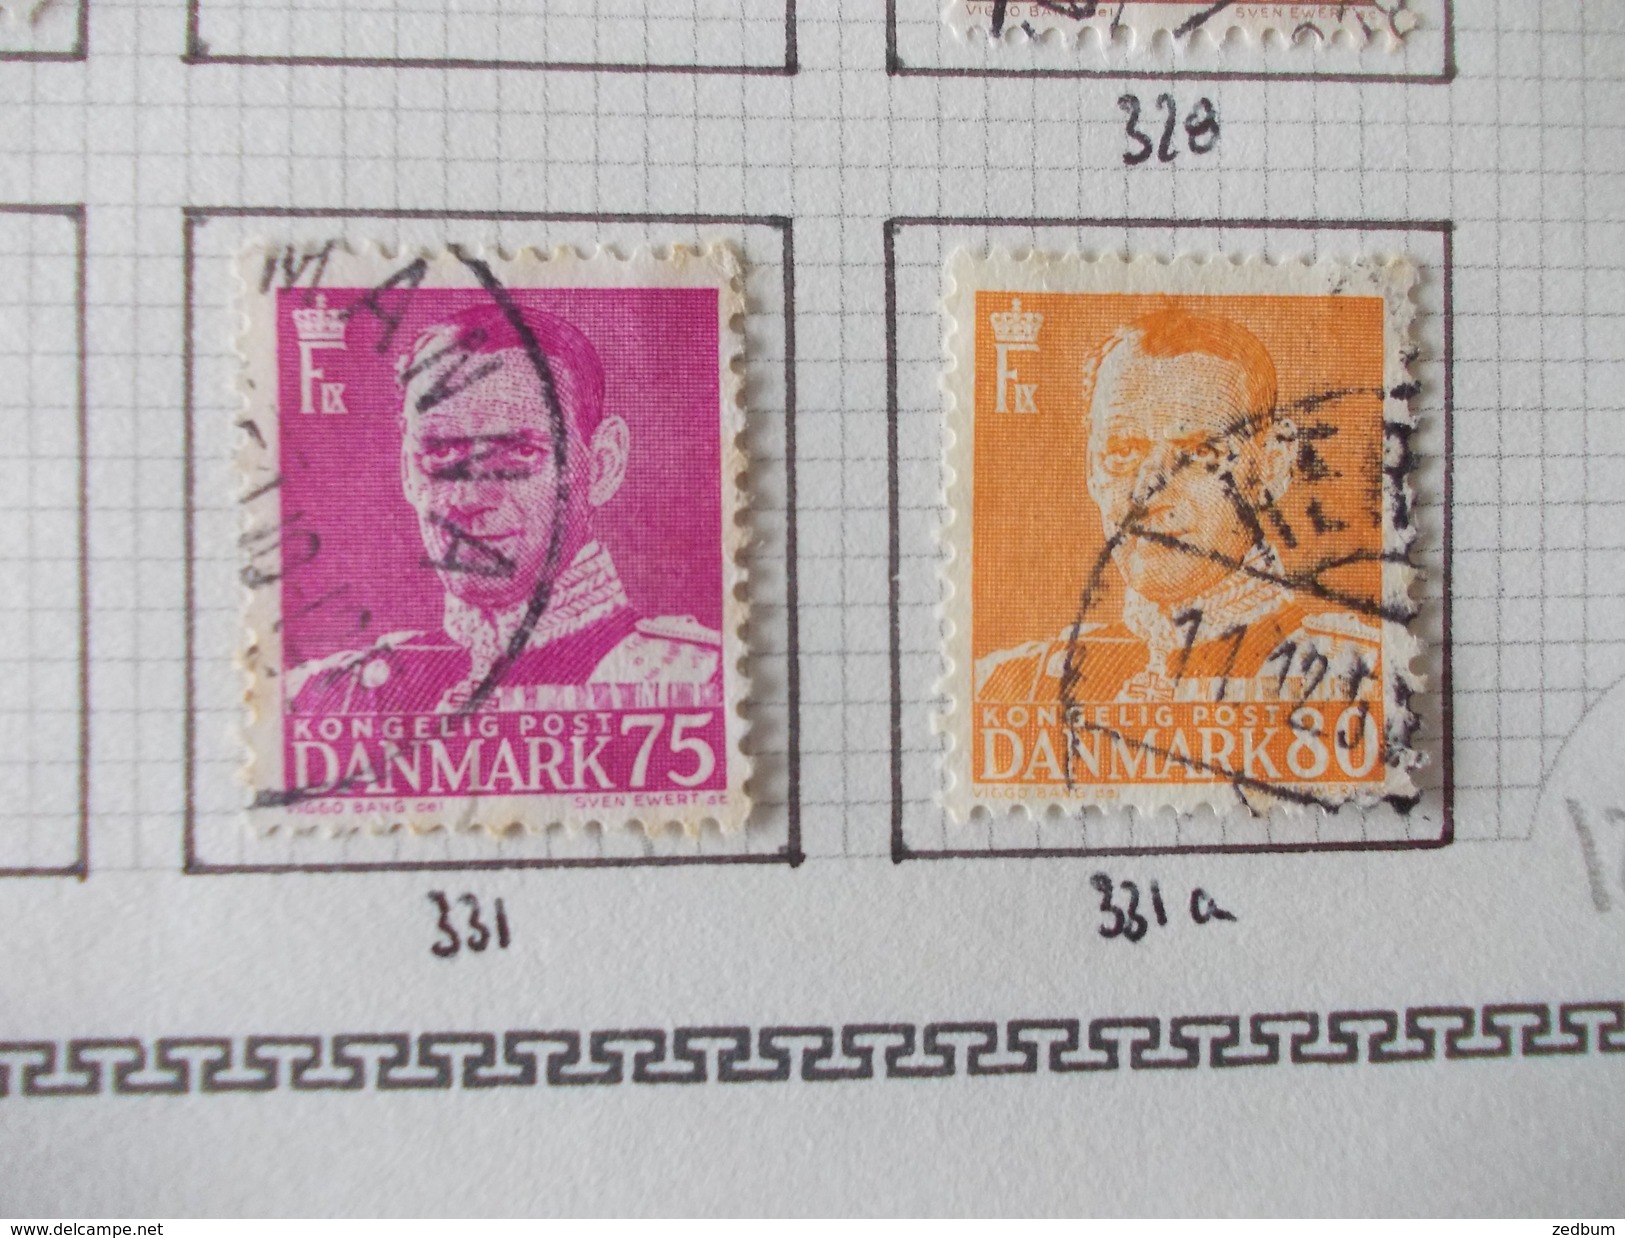 TIMBRE 1 page Danemark 28 timbres valeur 12.60 &euro;